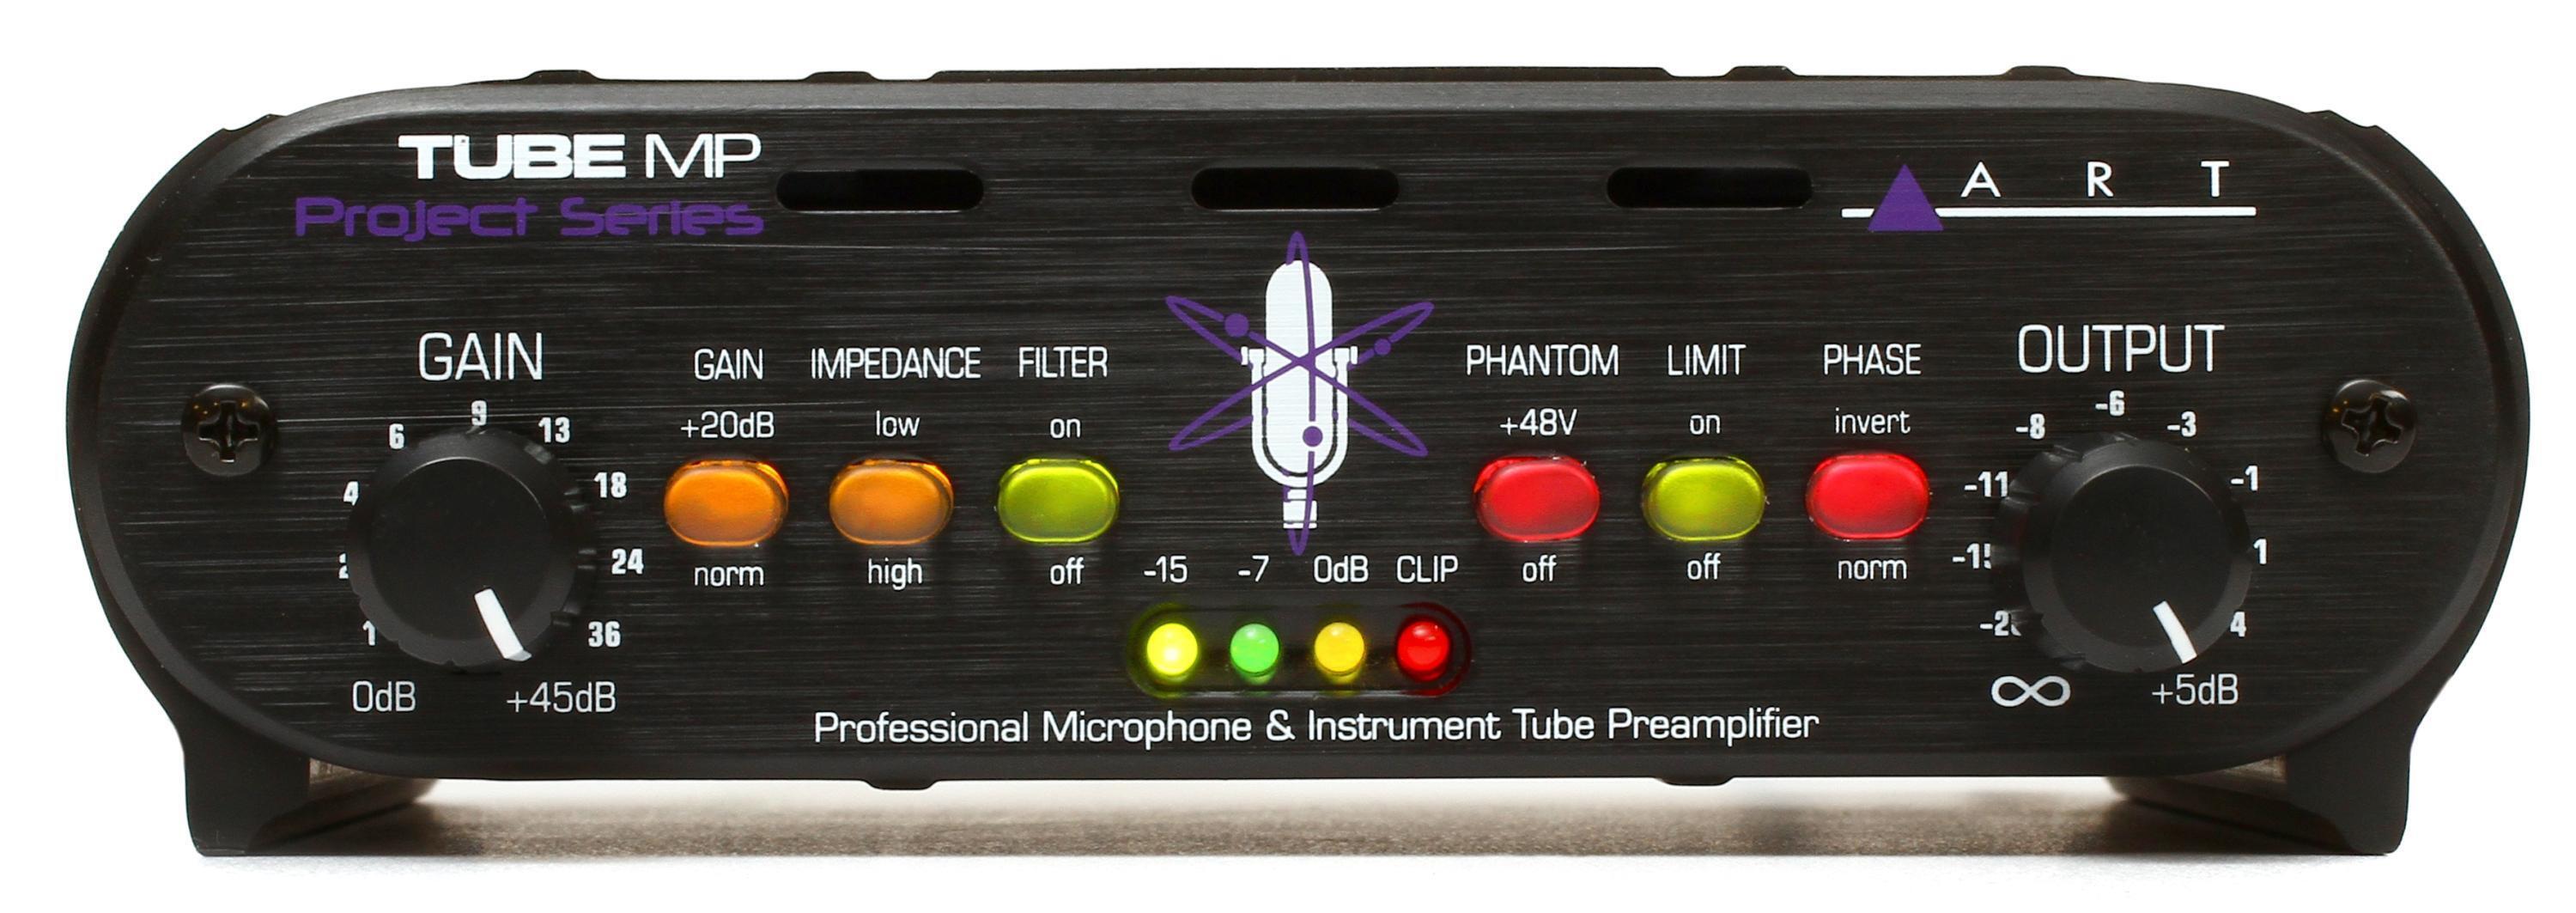 Bundled Item: ART Tube MP Project Series Tube Microphone Preamp